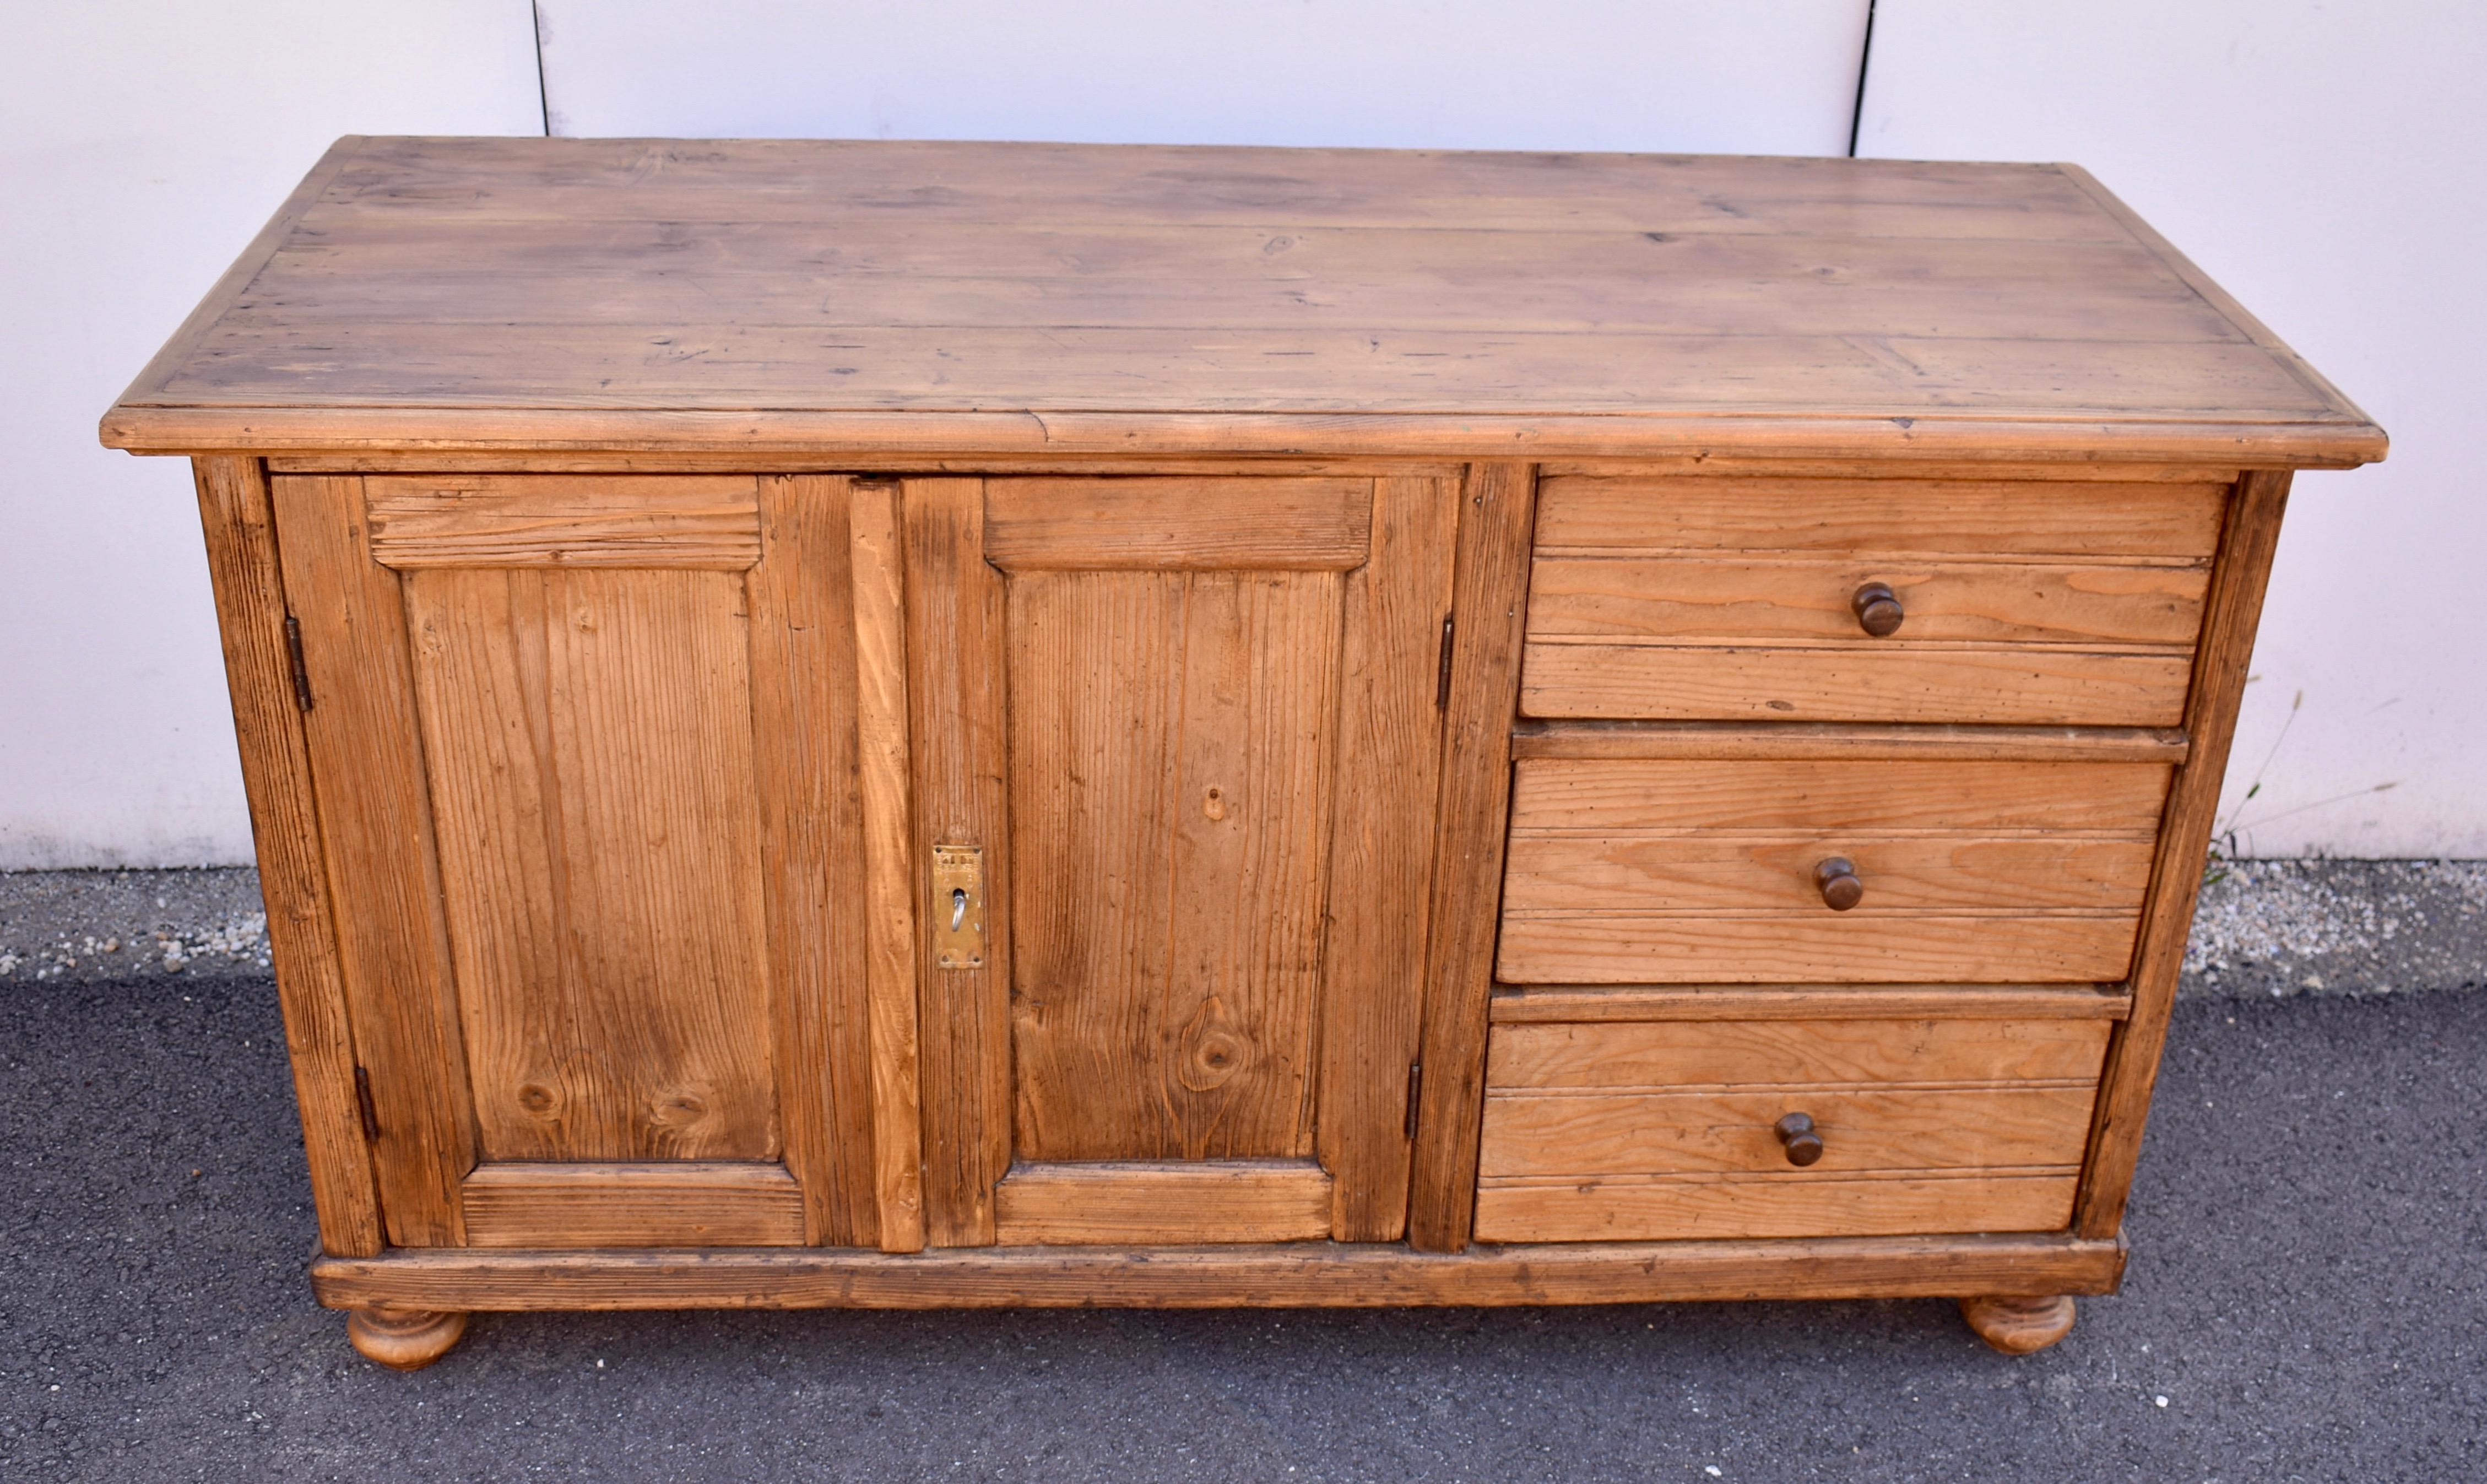 This is a fairly unusual configuration for a Central European dresser base, two flat-paneled doors on one side and three hand-cut dovetailed drawers on the other.  The top has a step-down edge formed with a trim of ogee crown molding.  The front is